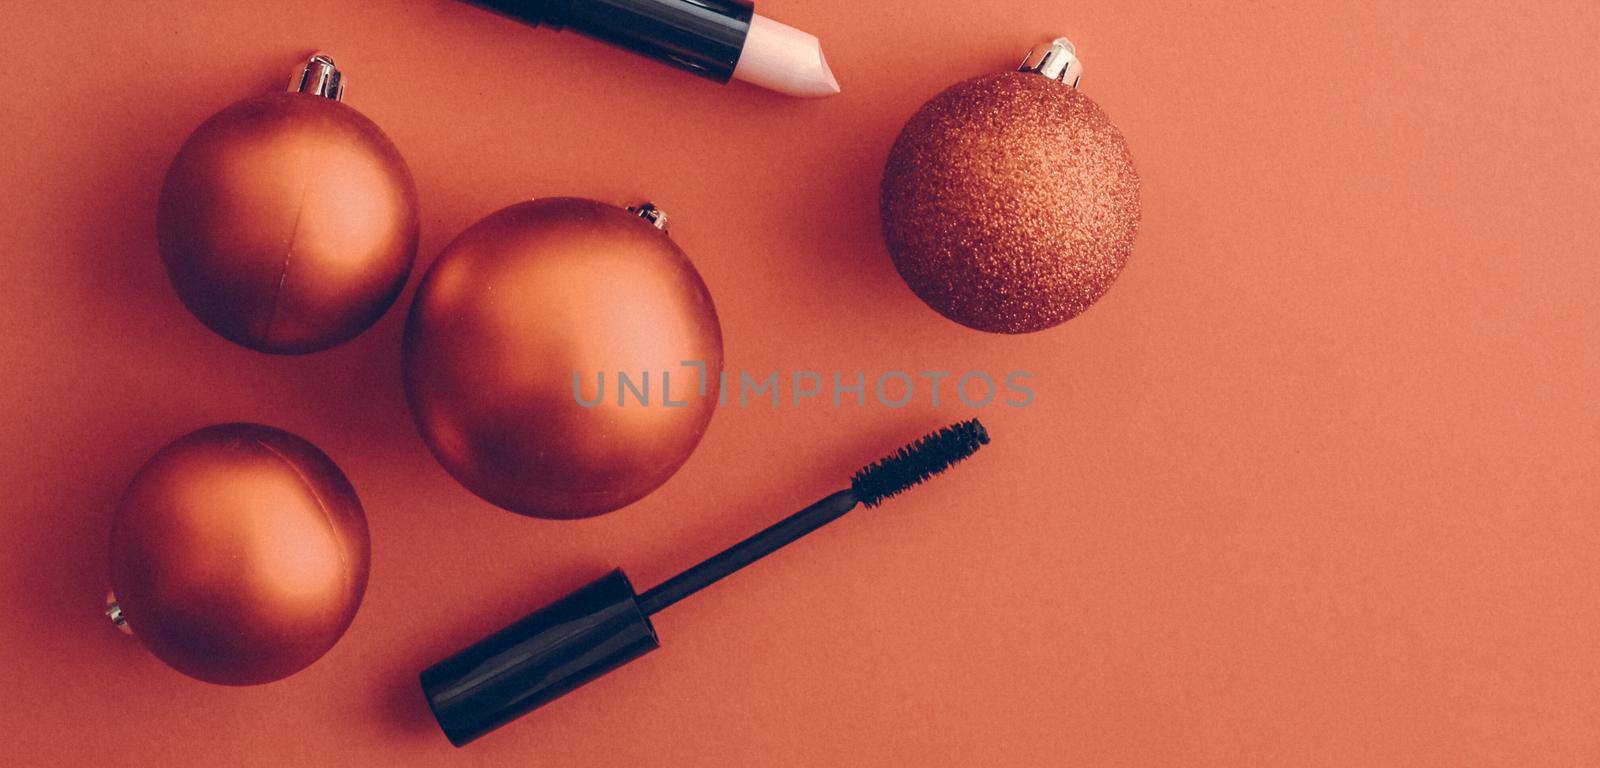 Make-up and cosmetics product set for beauty brand Christmas sale promotion, vintage orange flatlay background as holiday design by Anneleven